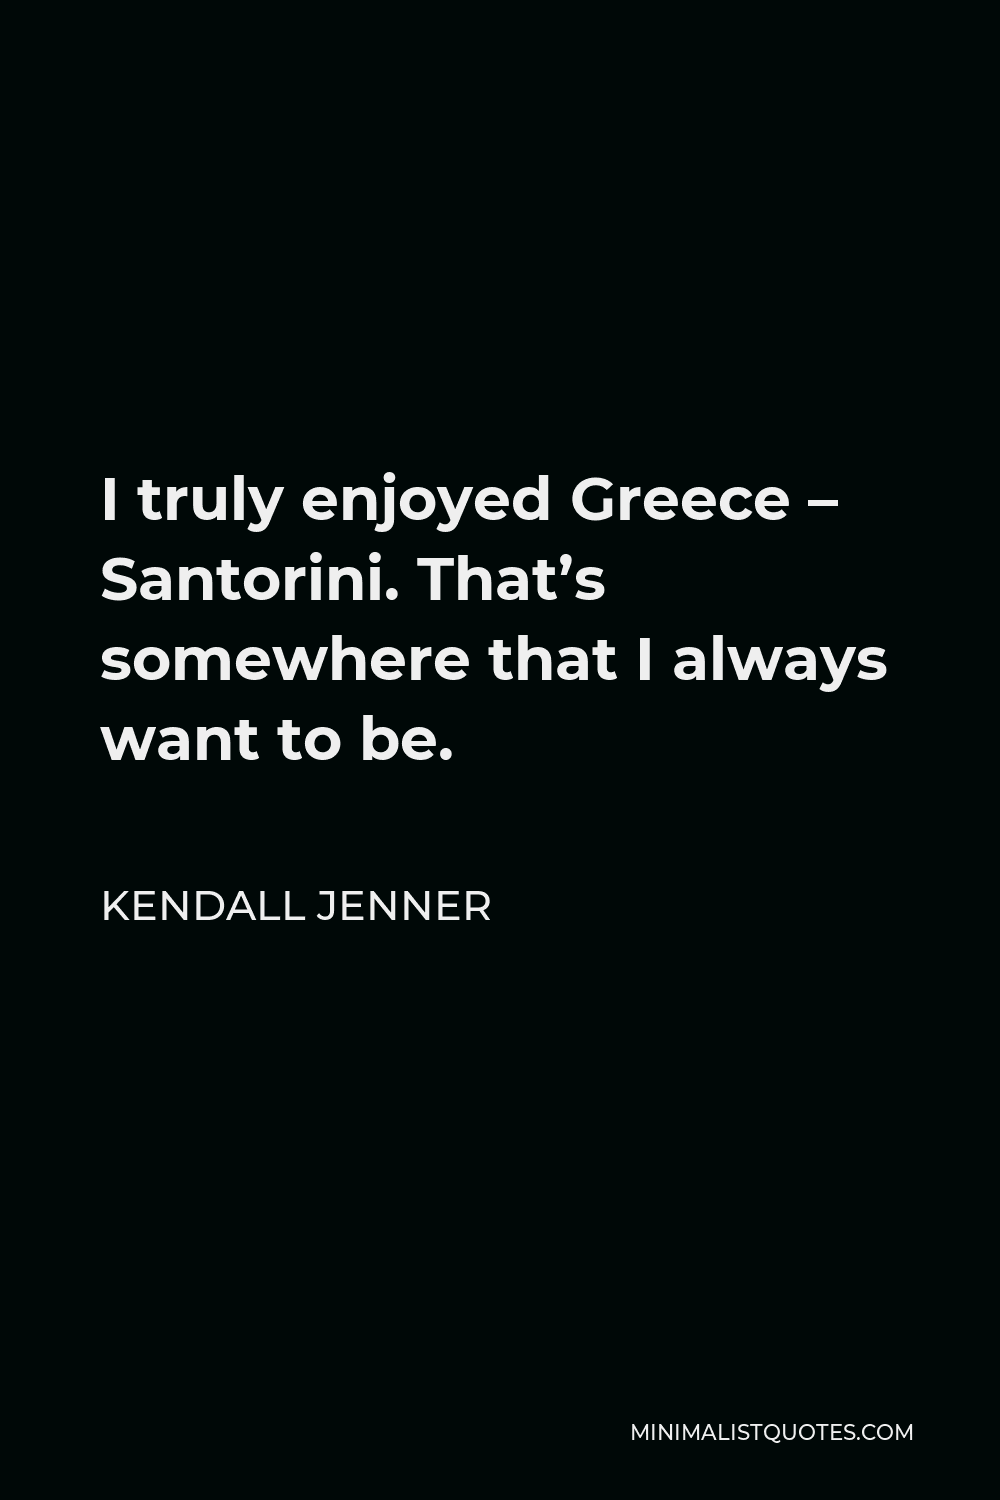 Kendall Jenner Quote - I truly enjoyed Greece – Santorini. That’s somewhere that I always want to be.